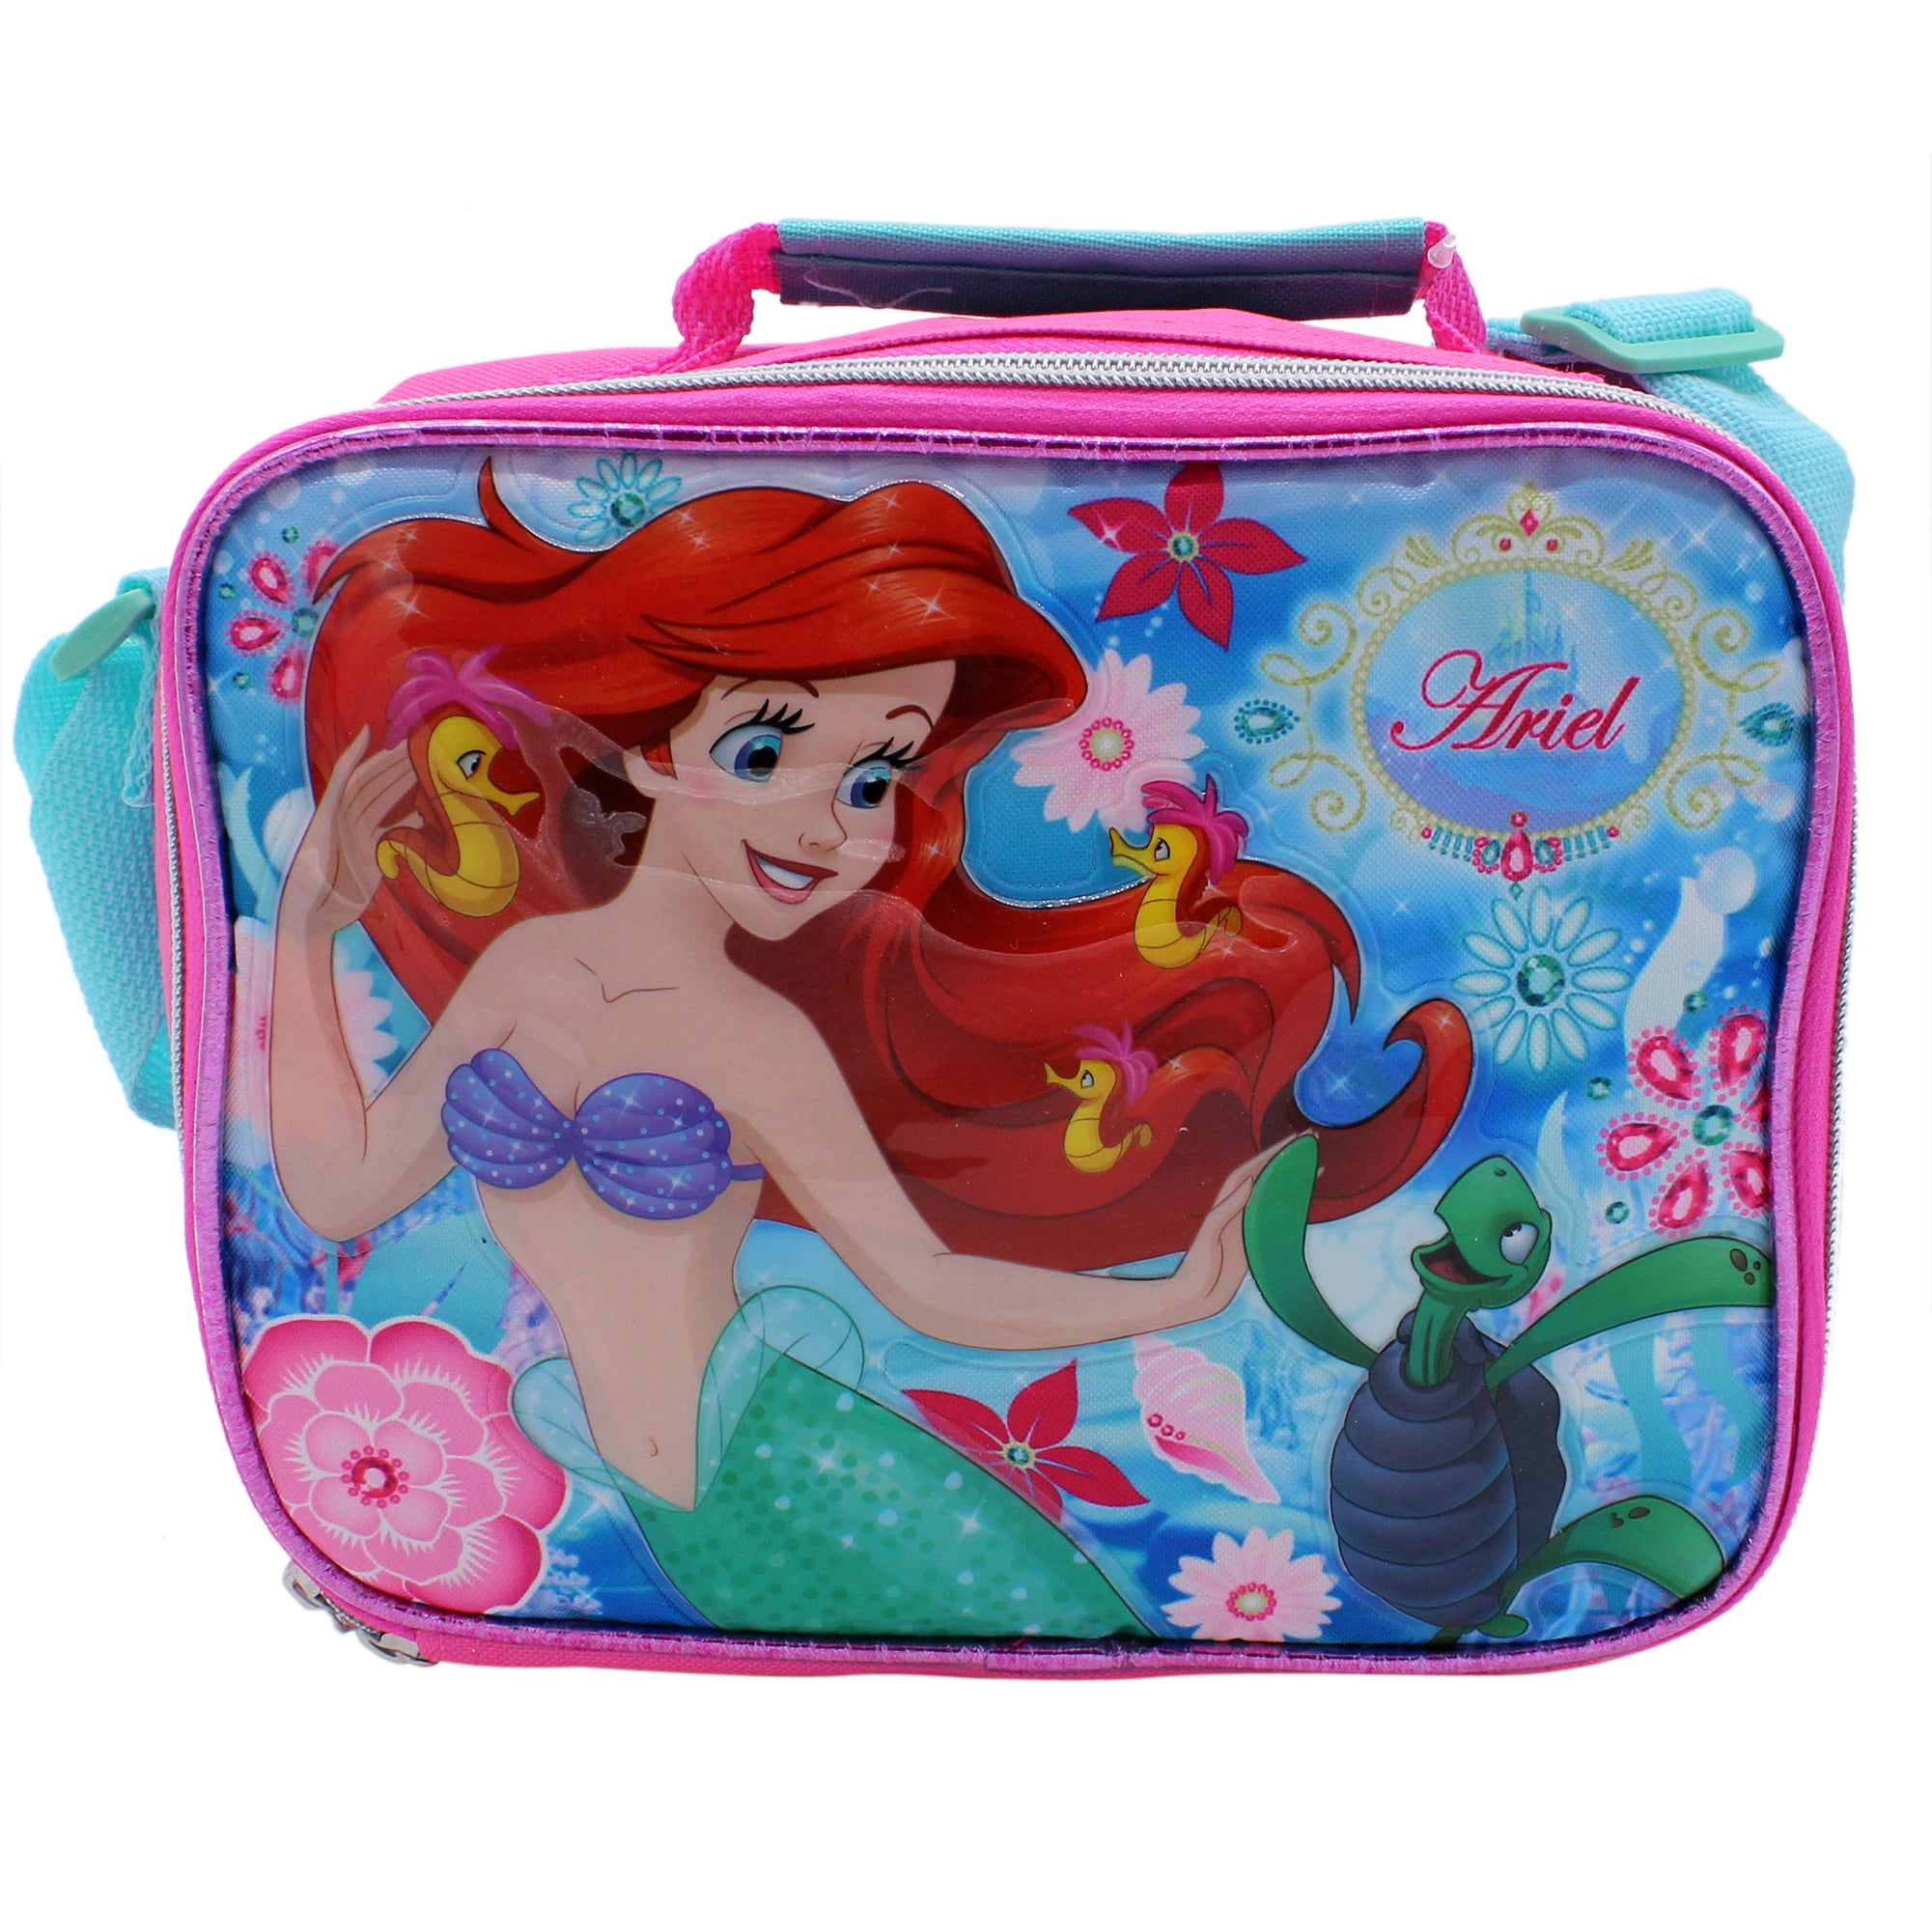 Disney Princess The Little Mermaid Ariel 9.5" Blue & Pink Insulated Lunch Bag 